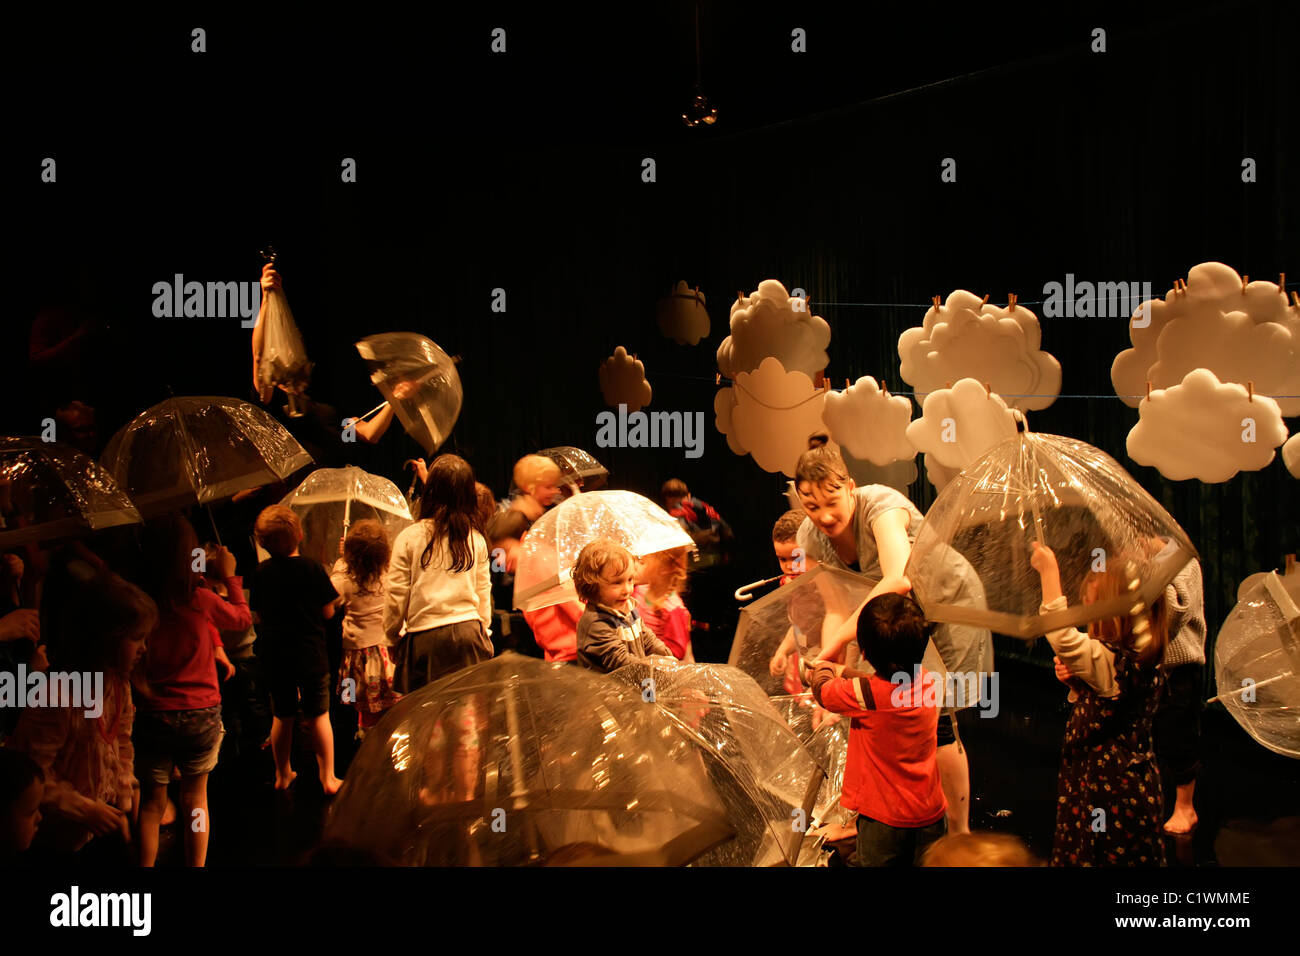 And The Rain Falls Down by Fevered Sleep at The Young Vic Stock Photo